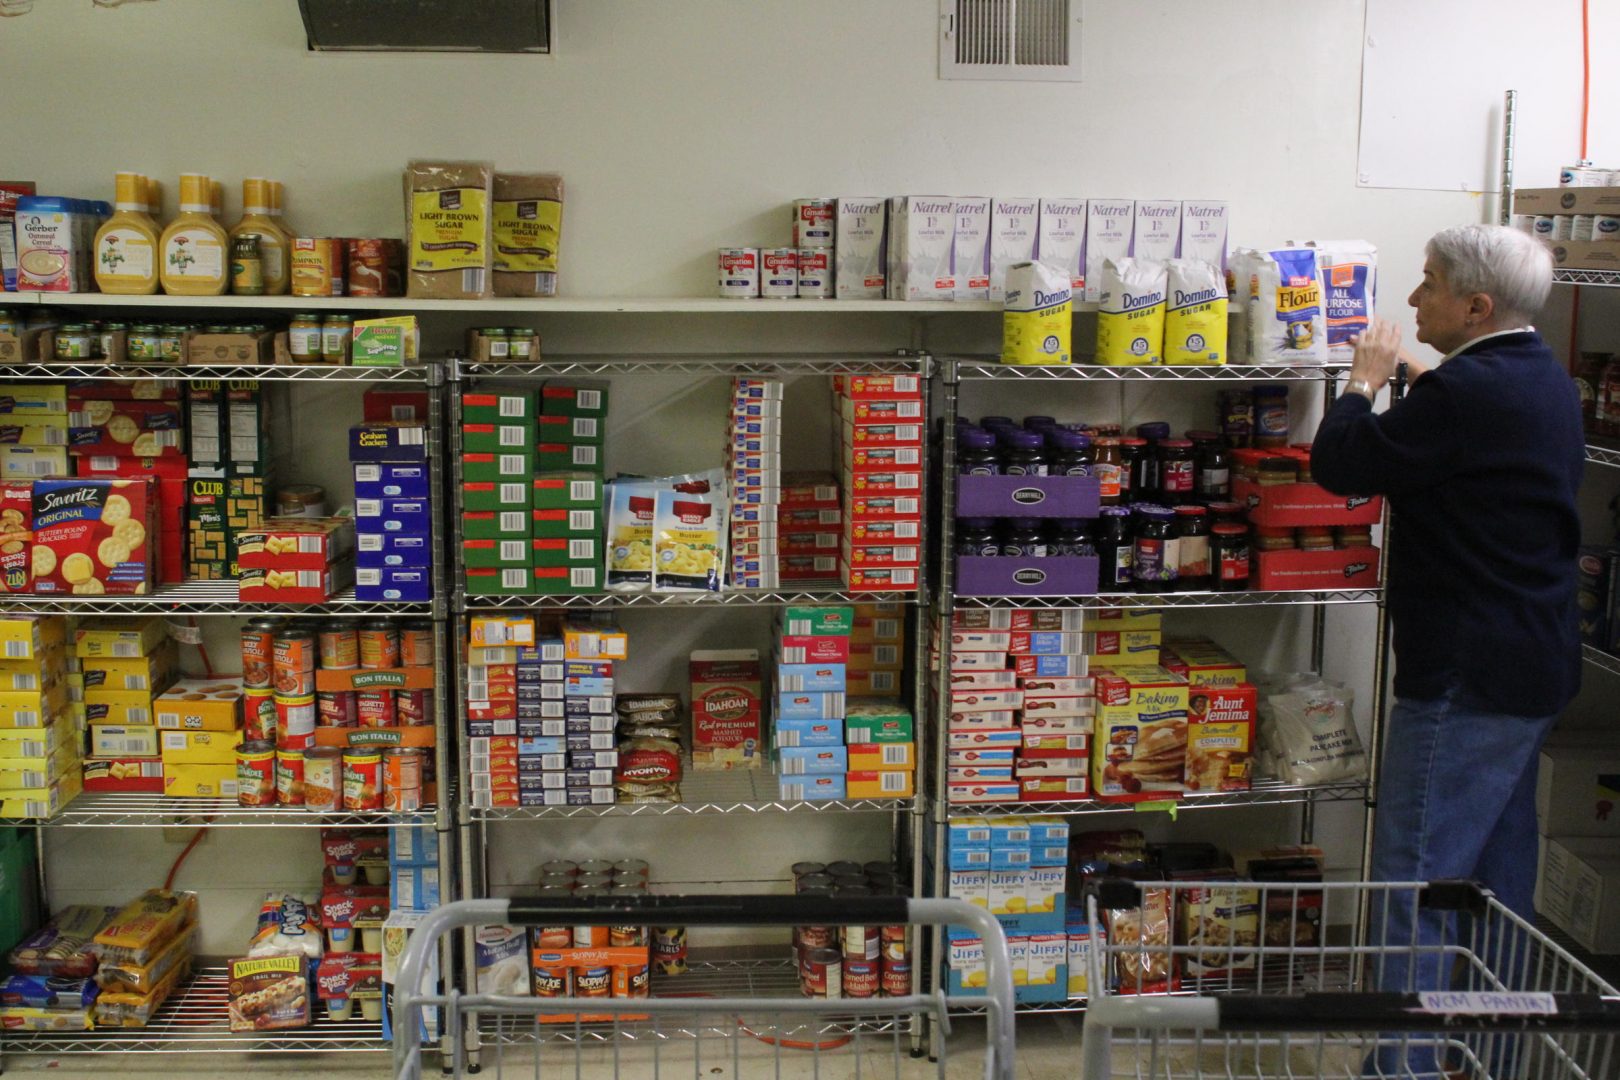 FILE PHOTO: A volunteer stocks shelves at the Northside Food Pantry in Pittsburgh in this 2017 photo.